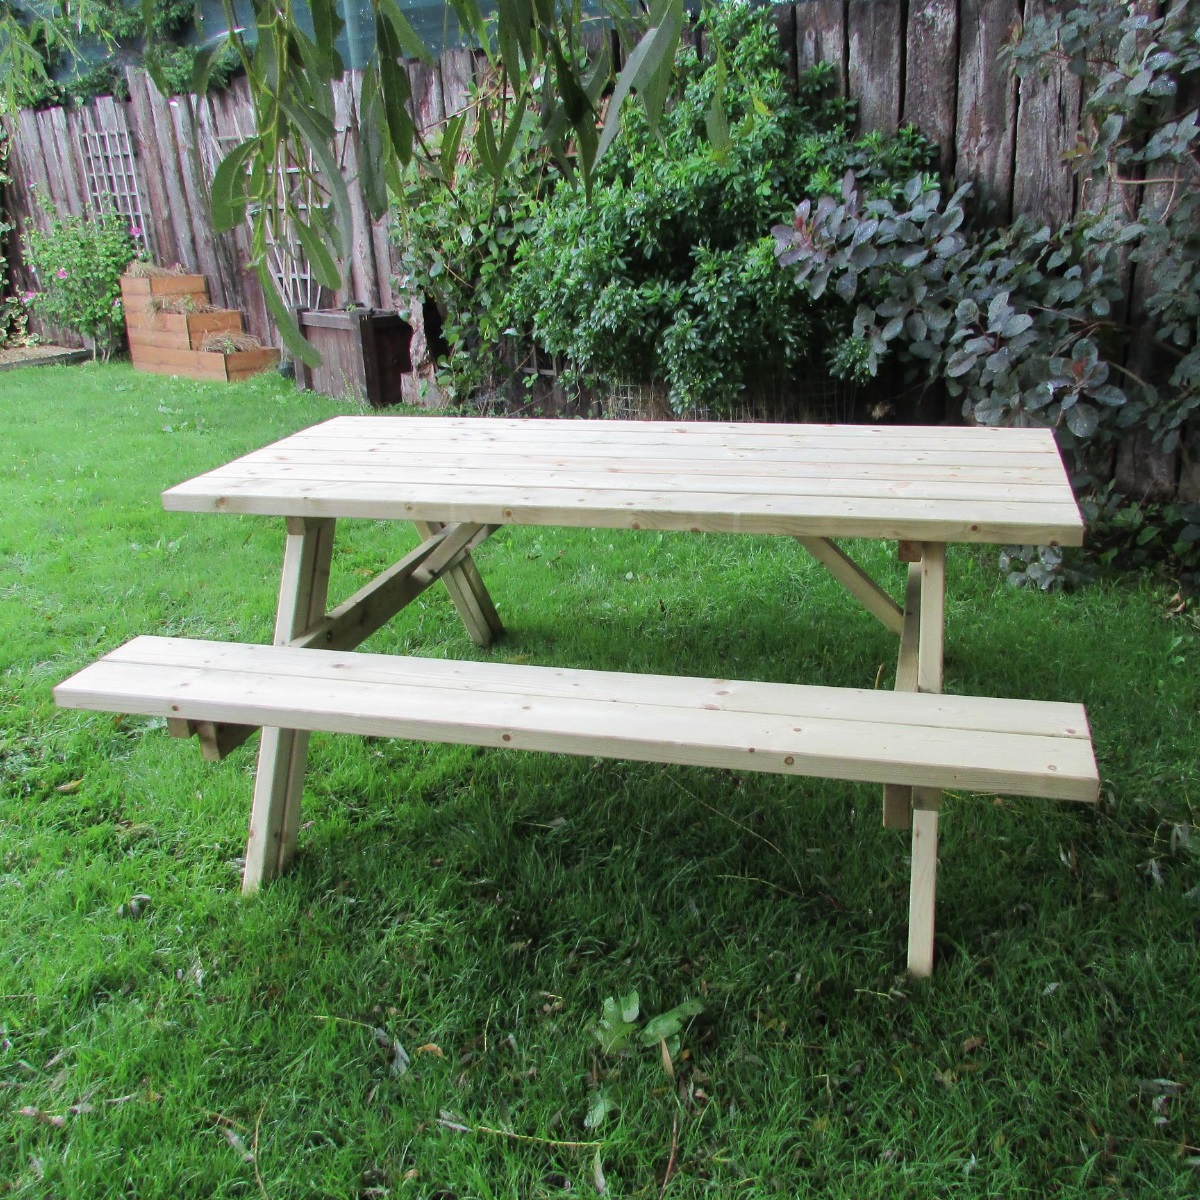 A wooden a frame picnic table on a lawn